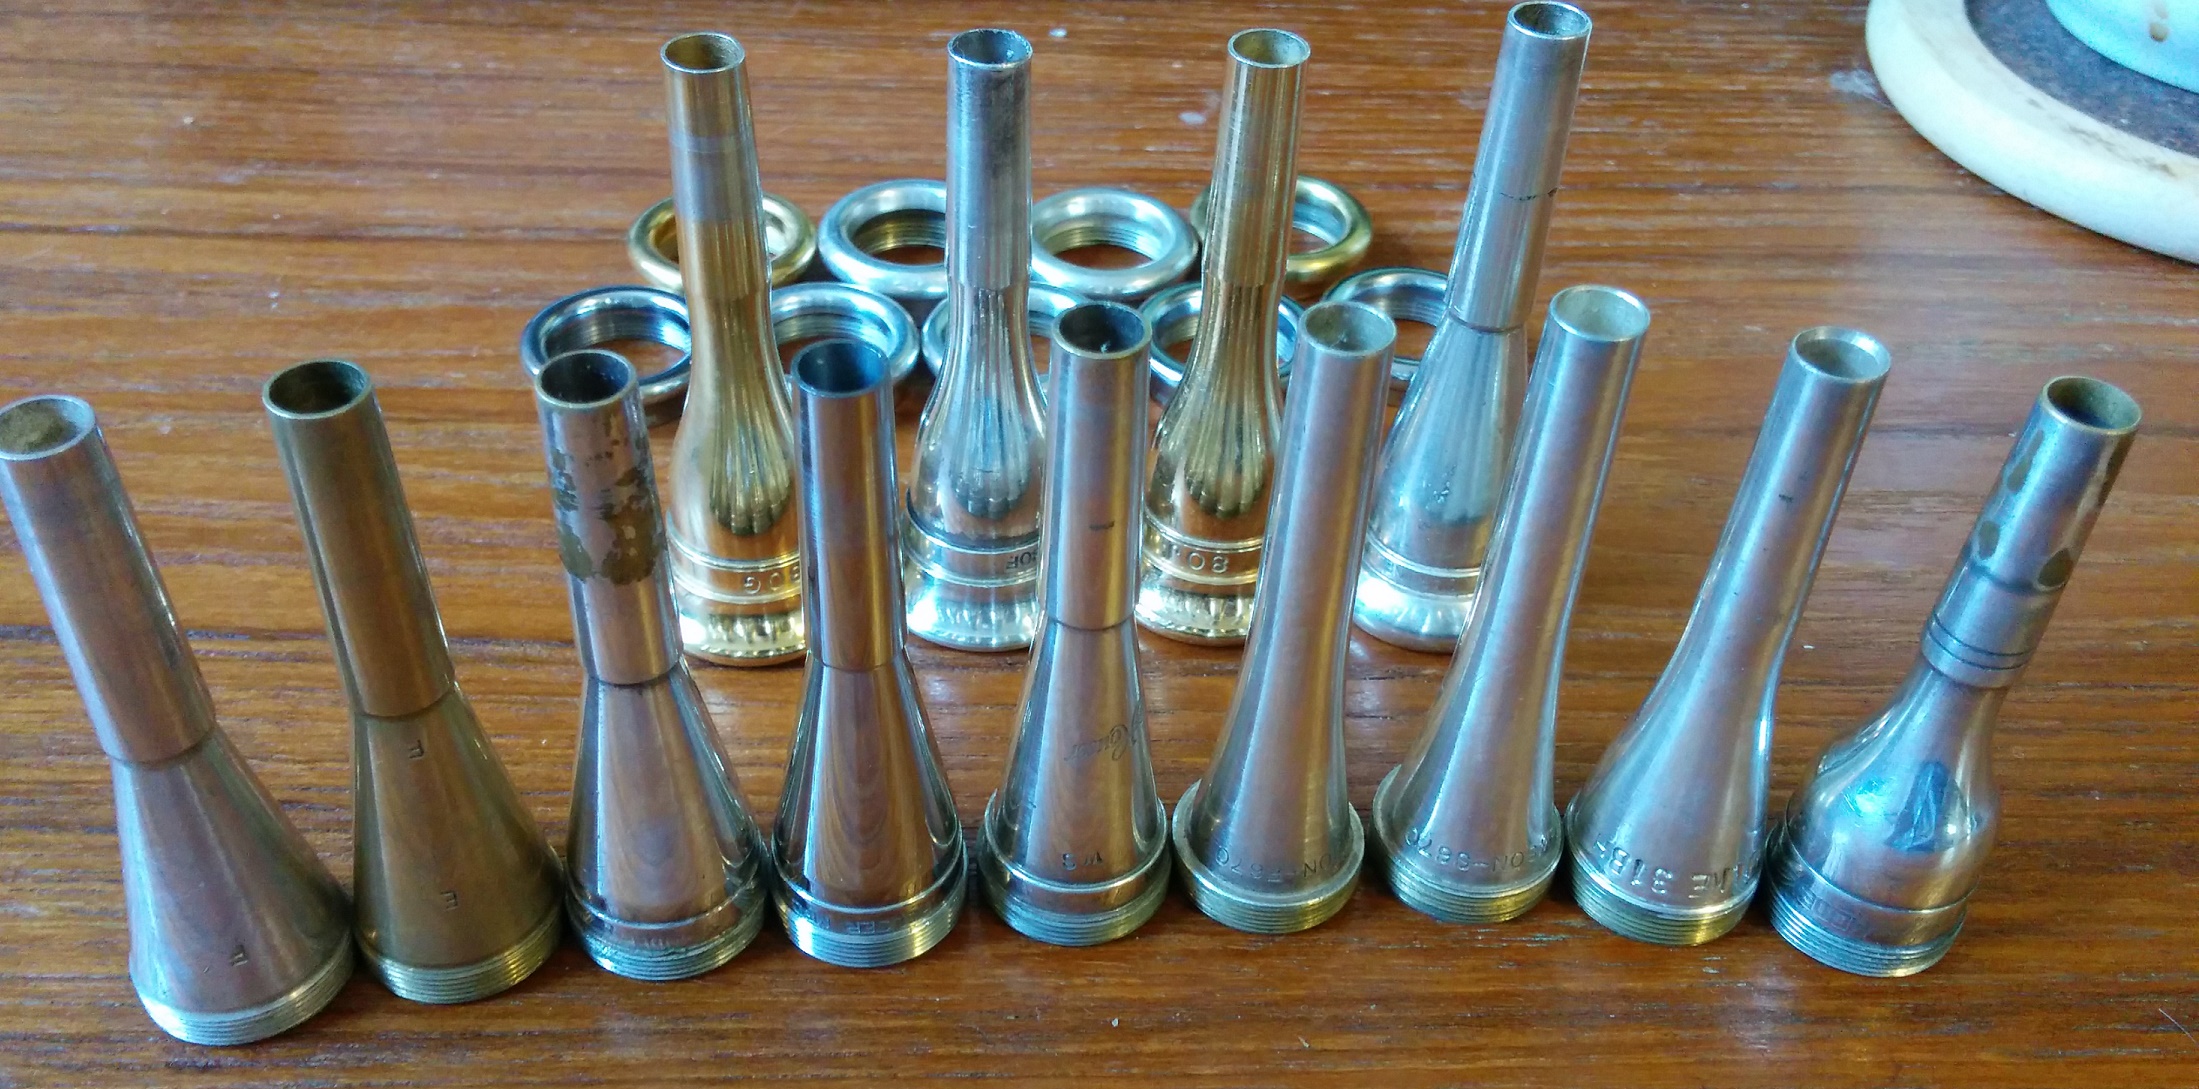 French Horn Mouthpiece Chart